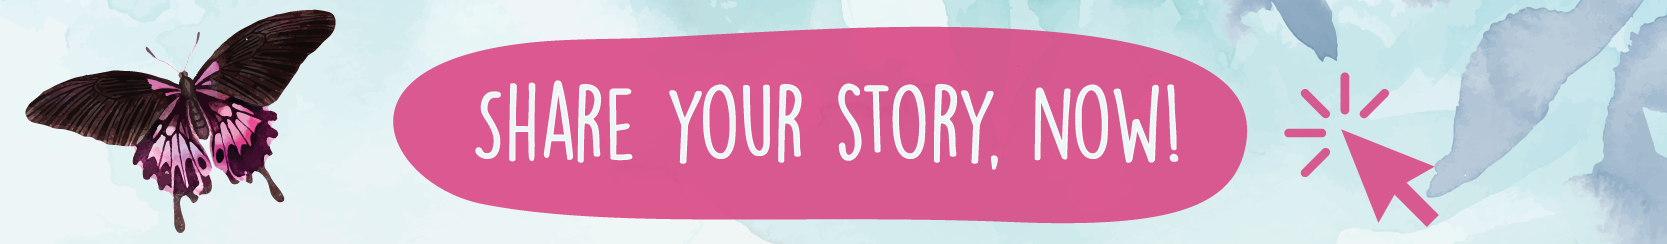 Share your story!